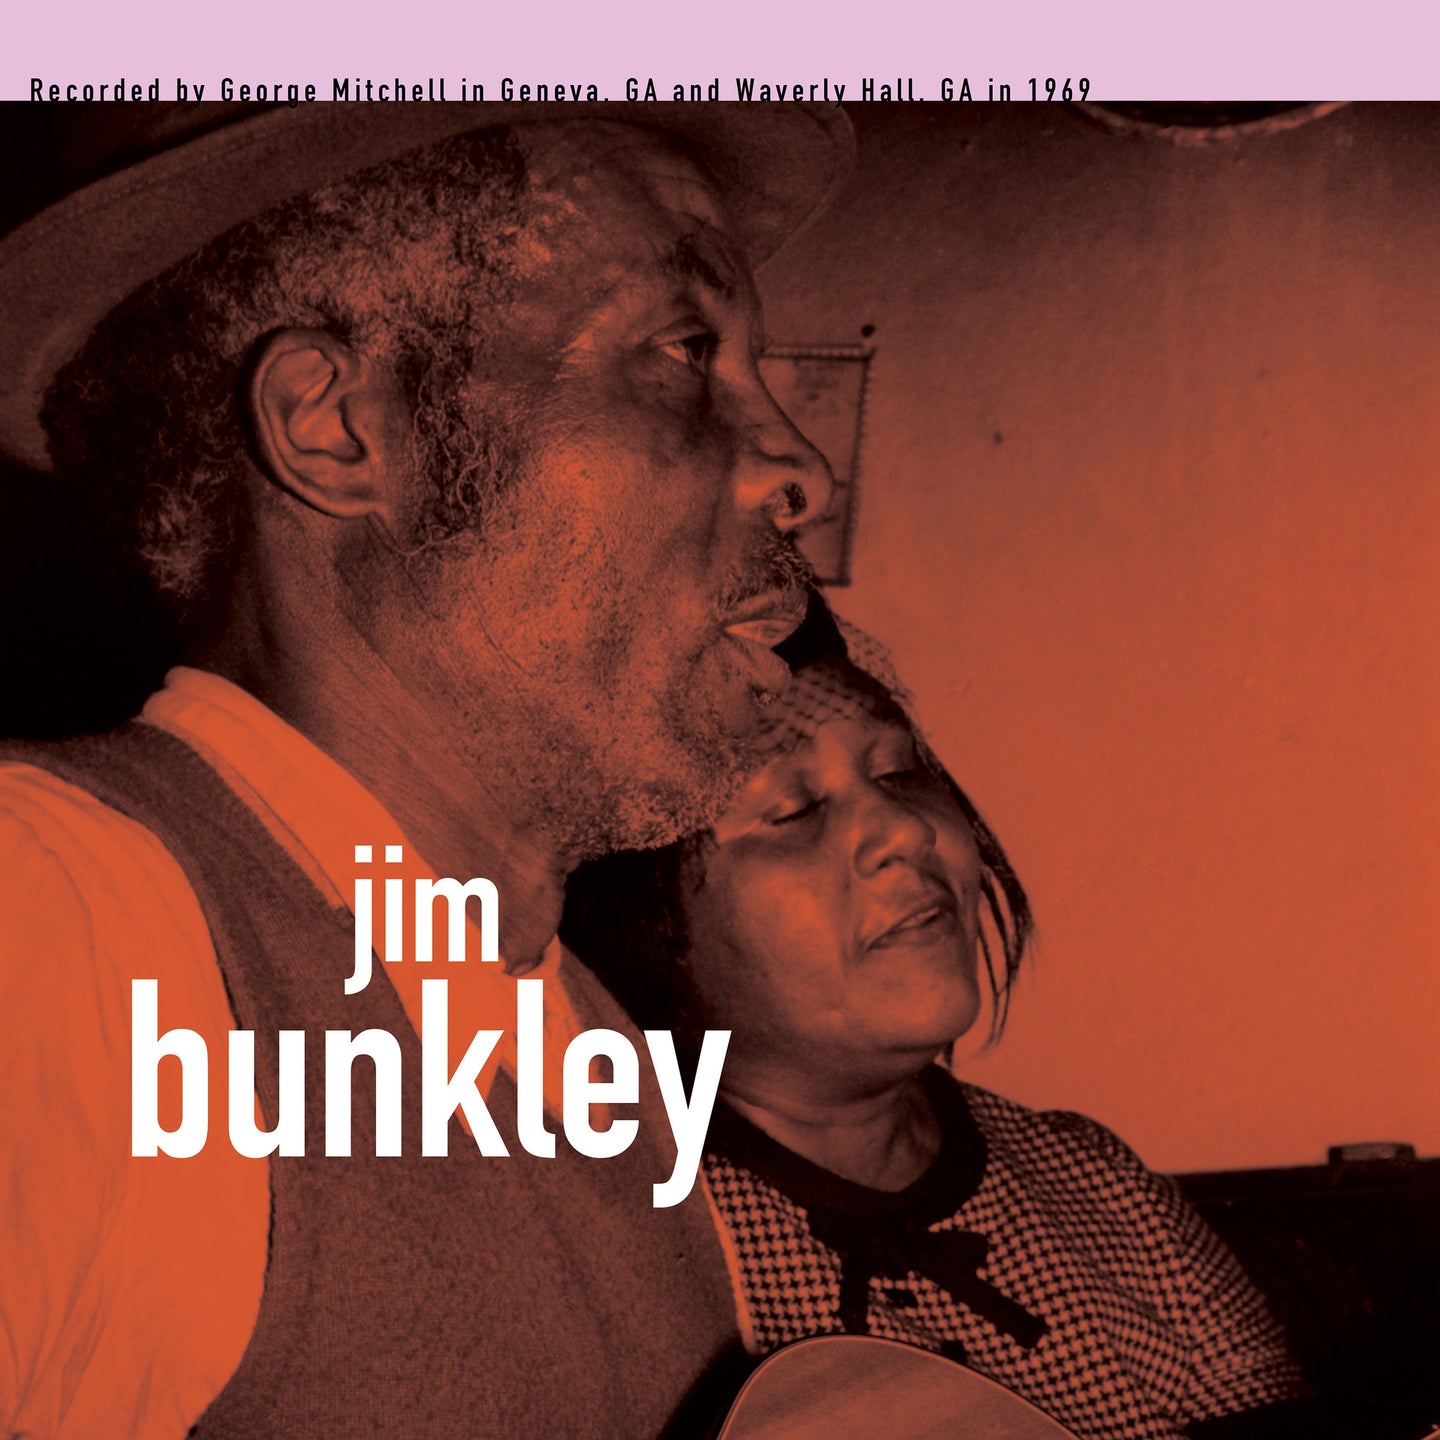 Jim Bunkley: George Mitchell Collection